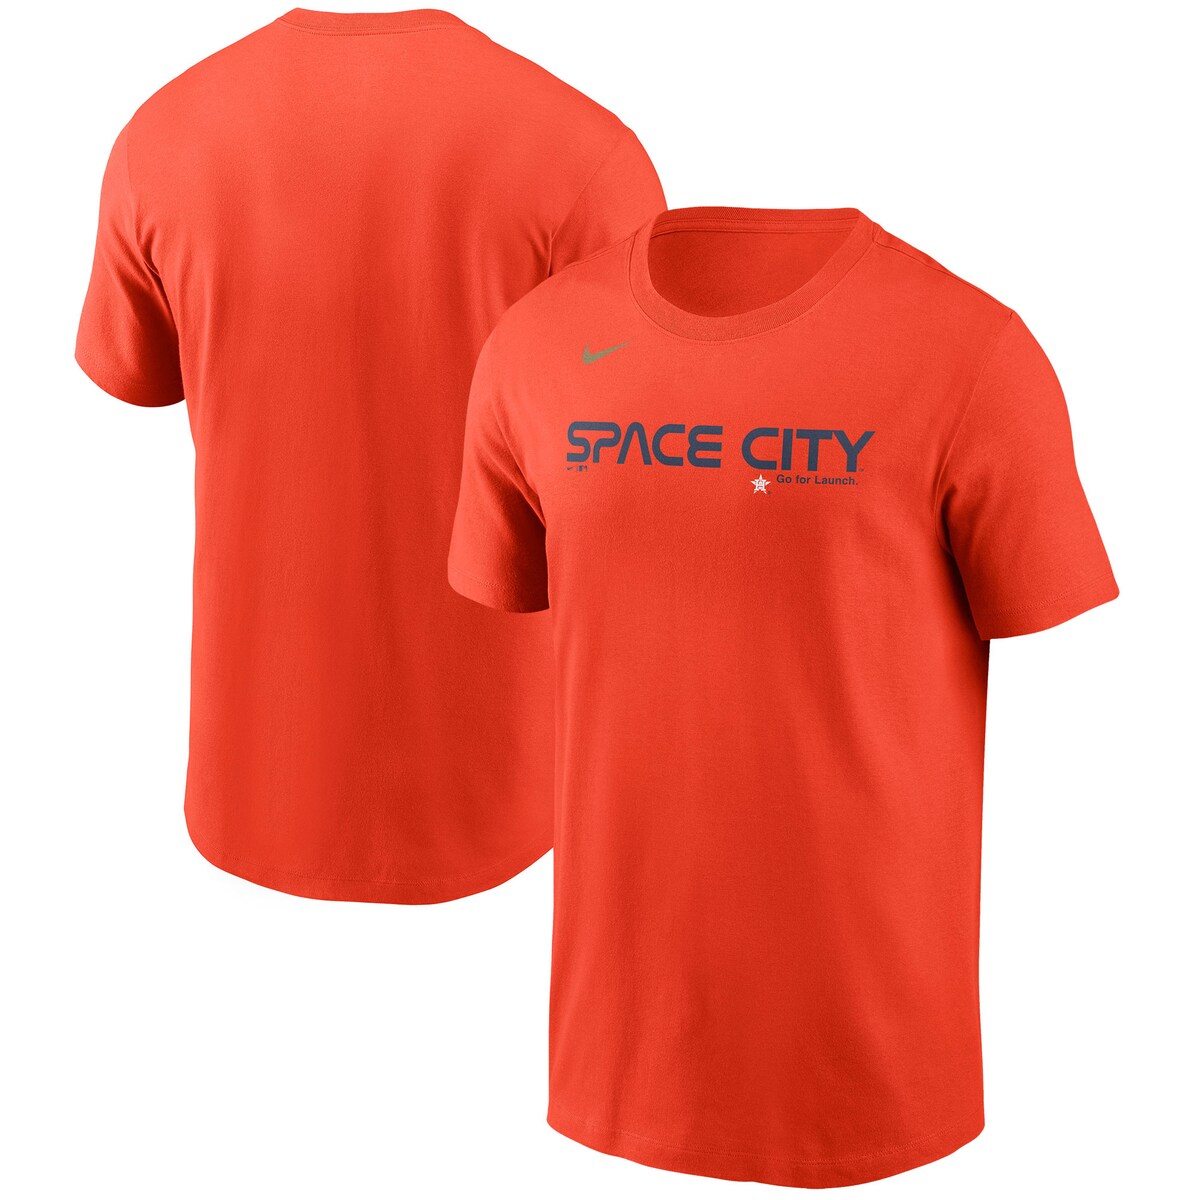 MLB AXgY TVc Nike iCL Y IW (Men's Nike City Connect Wordmark Short Sleeve Cotton T-Shirt)